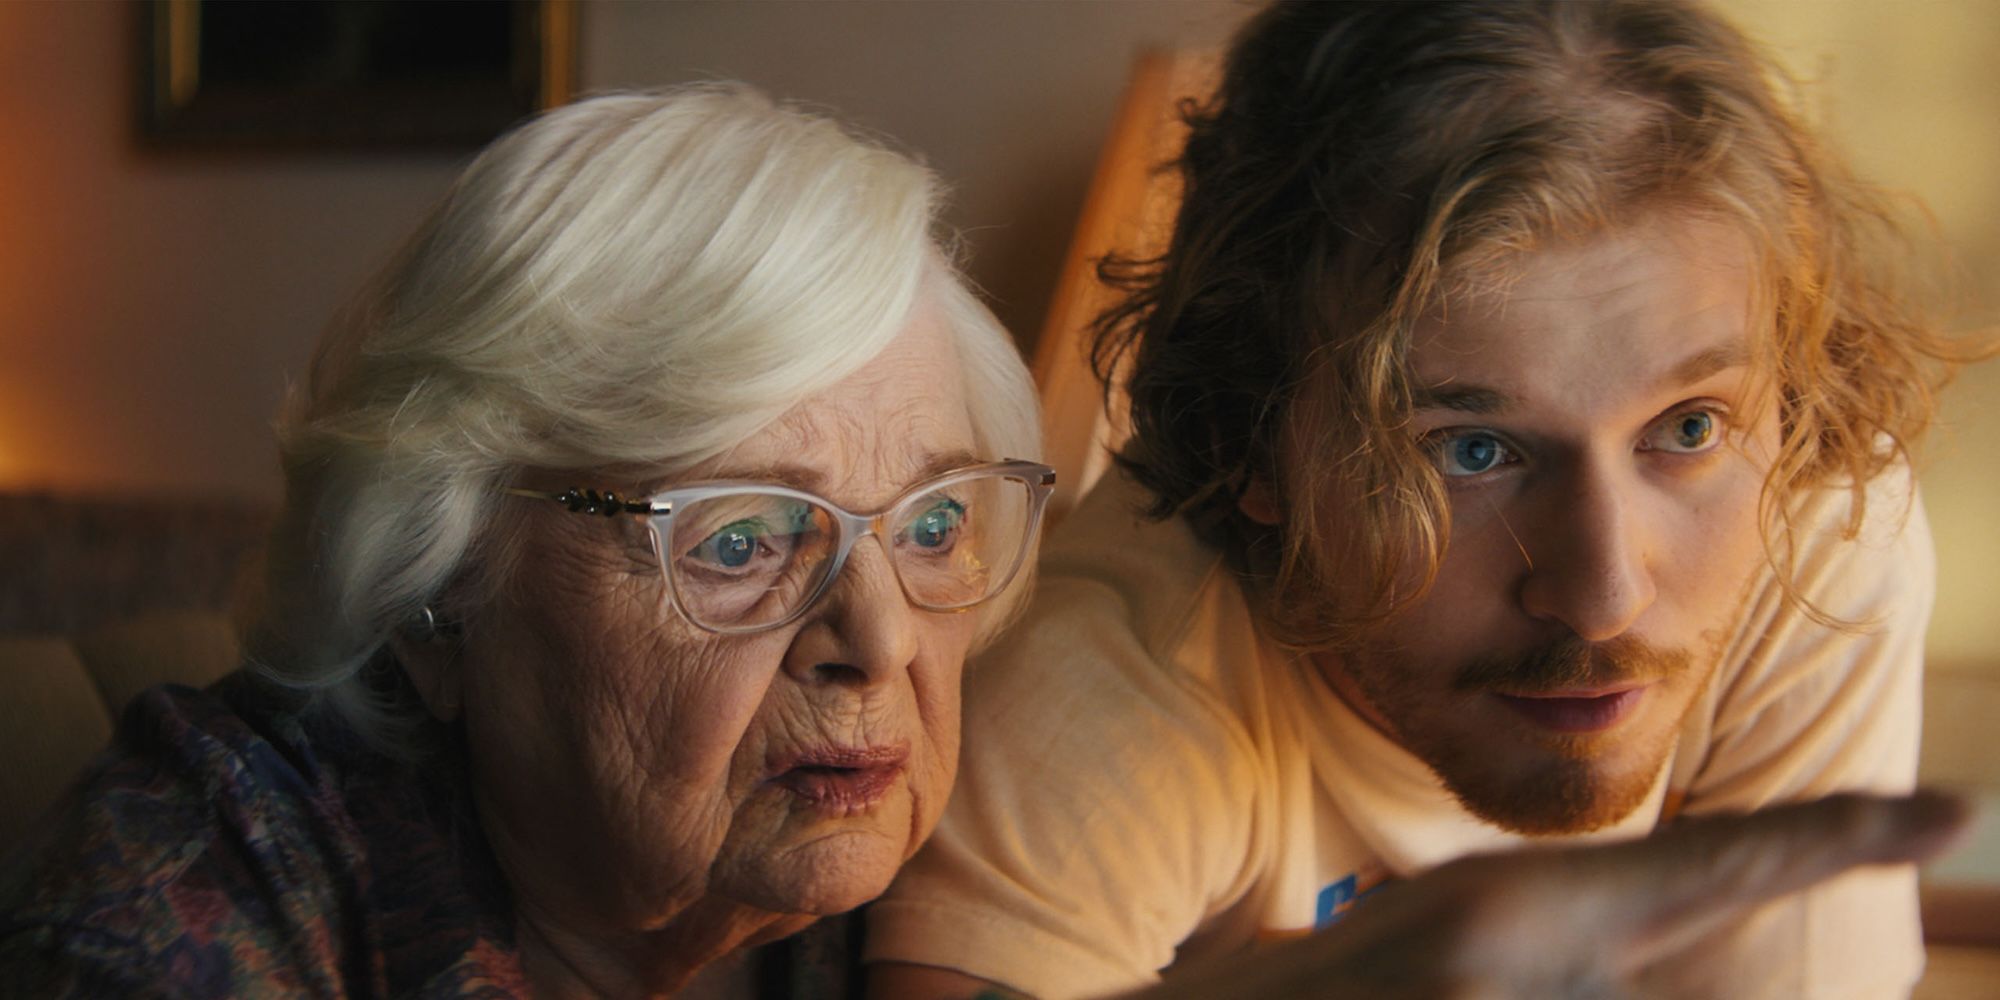 June Squibb and Fred Hechinger peer at the computer screen in Thelma